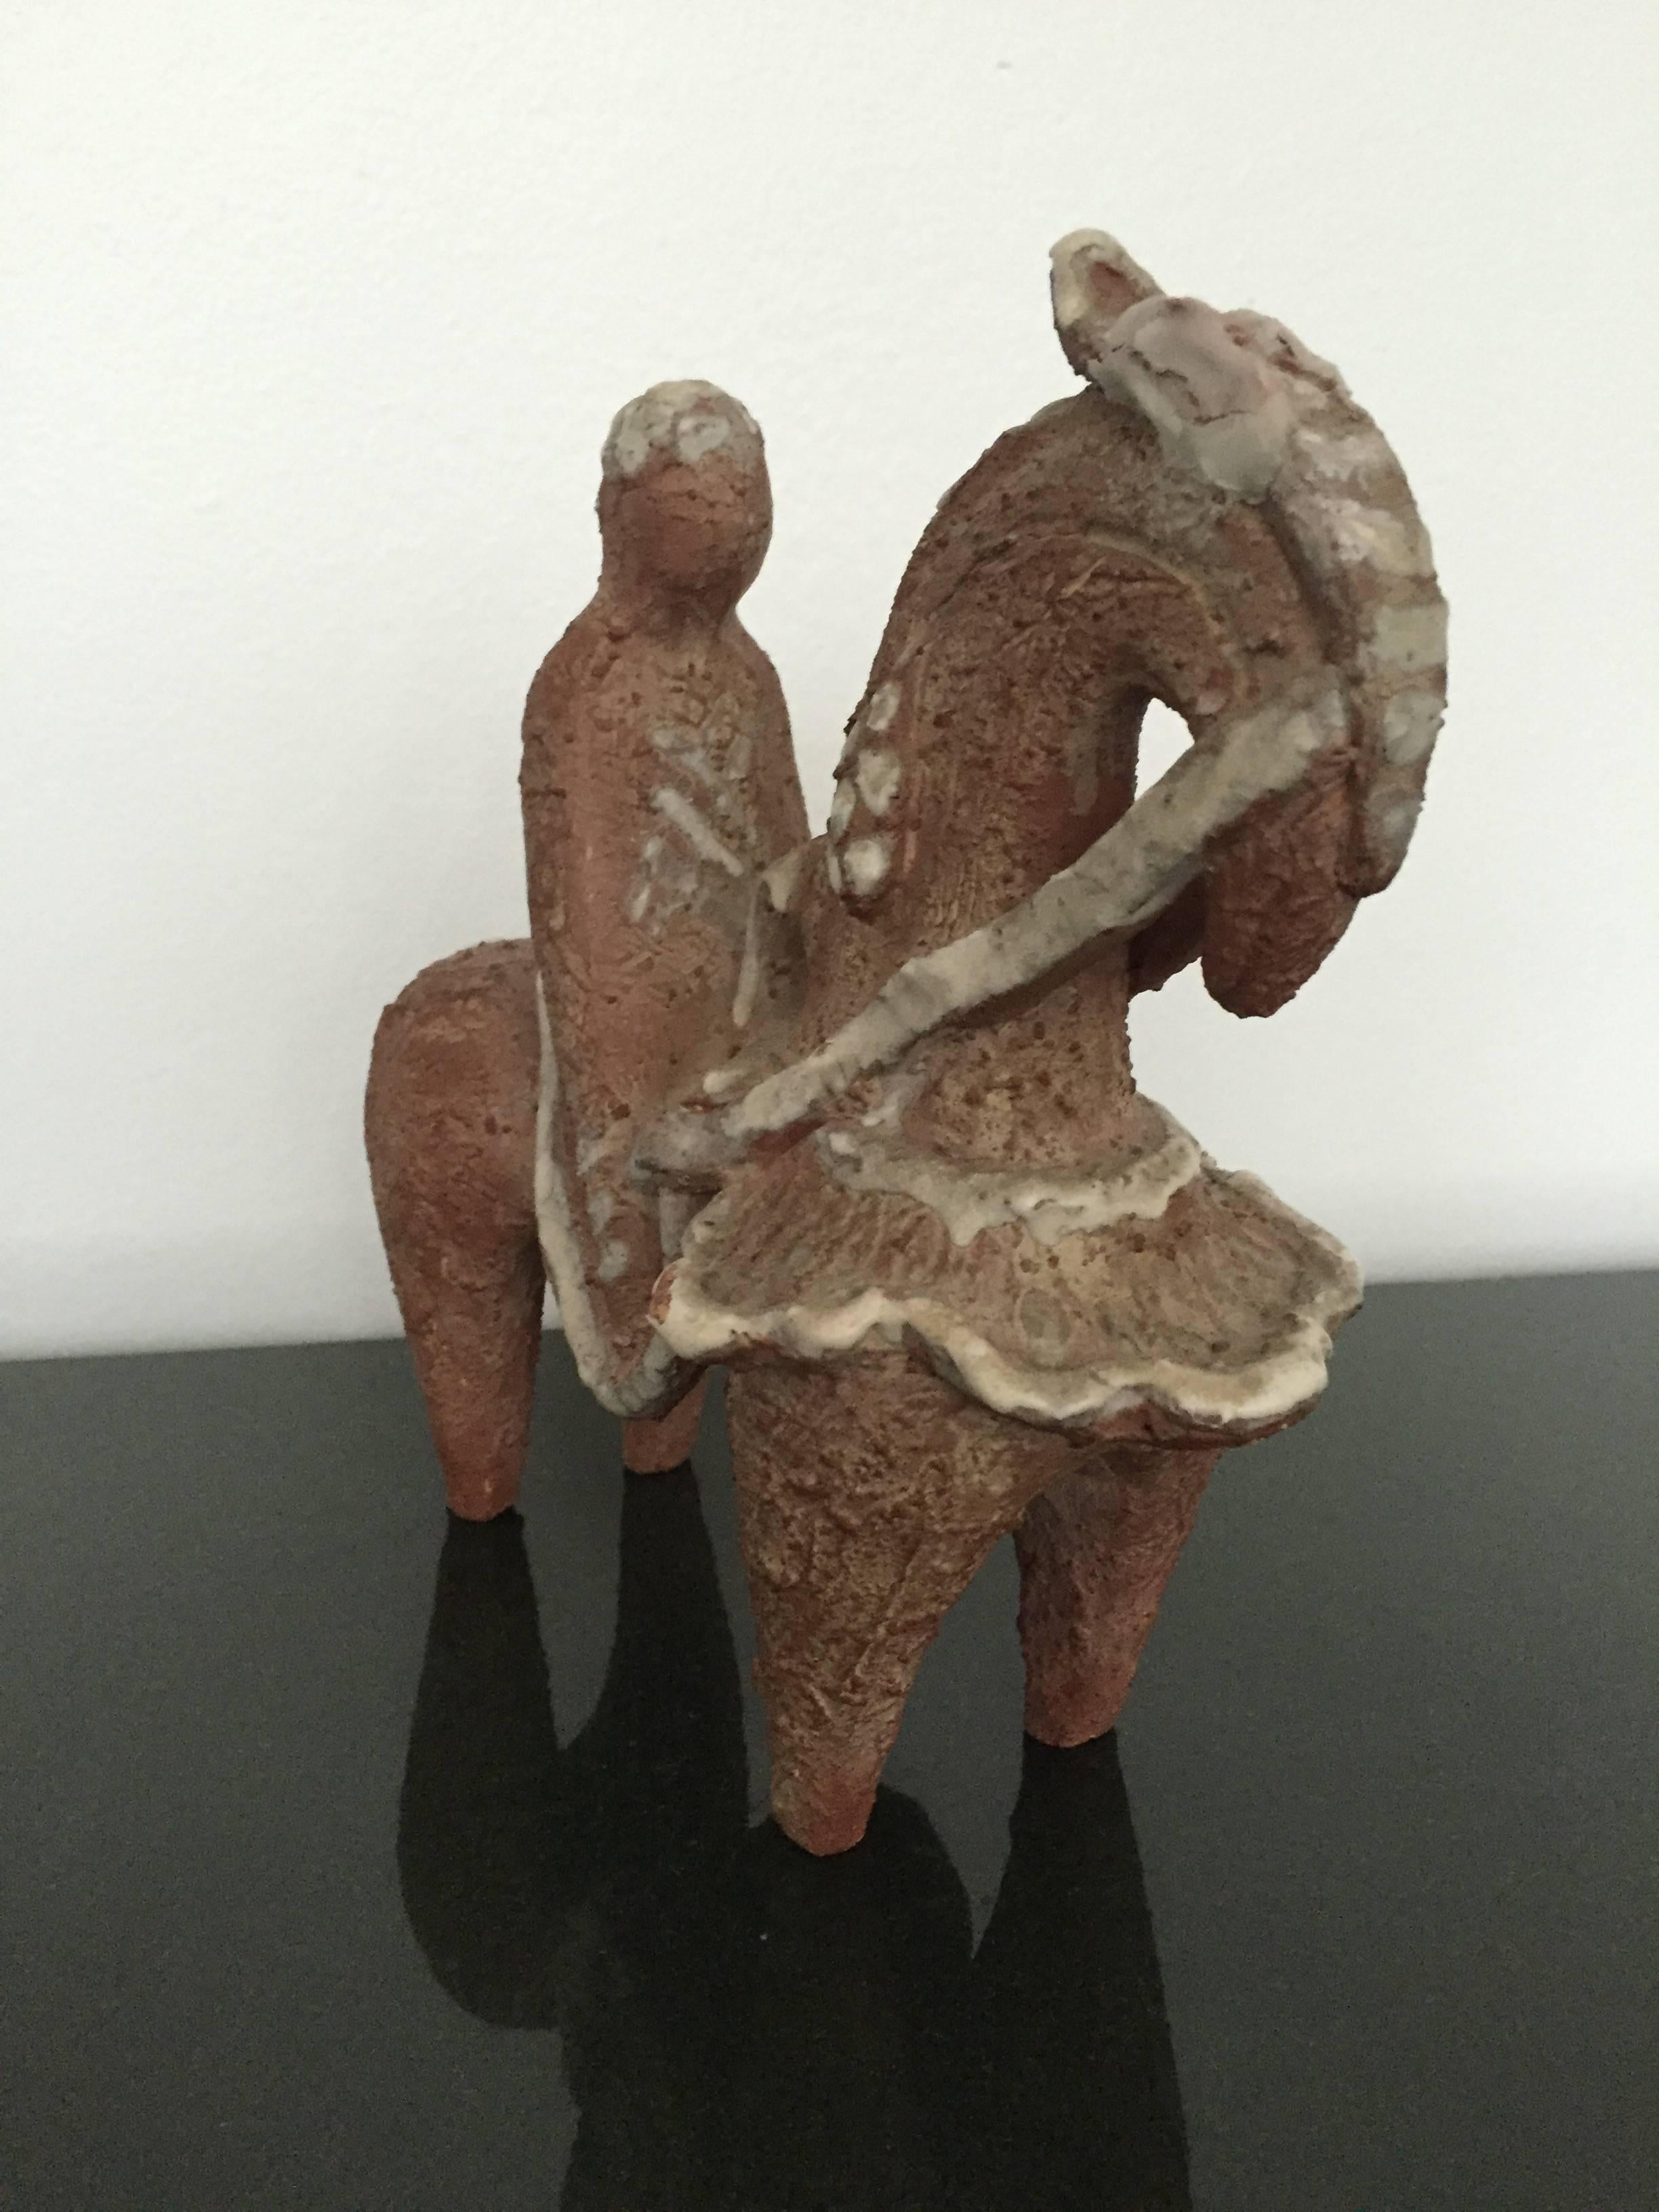 Unique Mid-Century Modern Italian signed and numbered 1950s horse and rider ceramic sculpture. Great condition and very attractive. The ceramic measures: 9.5" wide x 9" high x 4.5" deep.